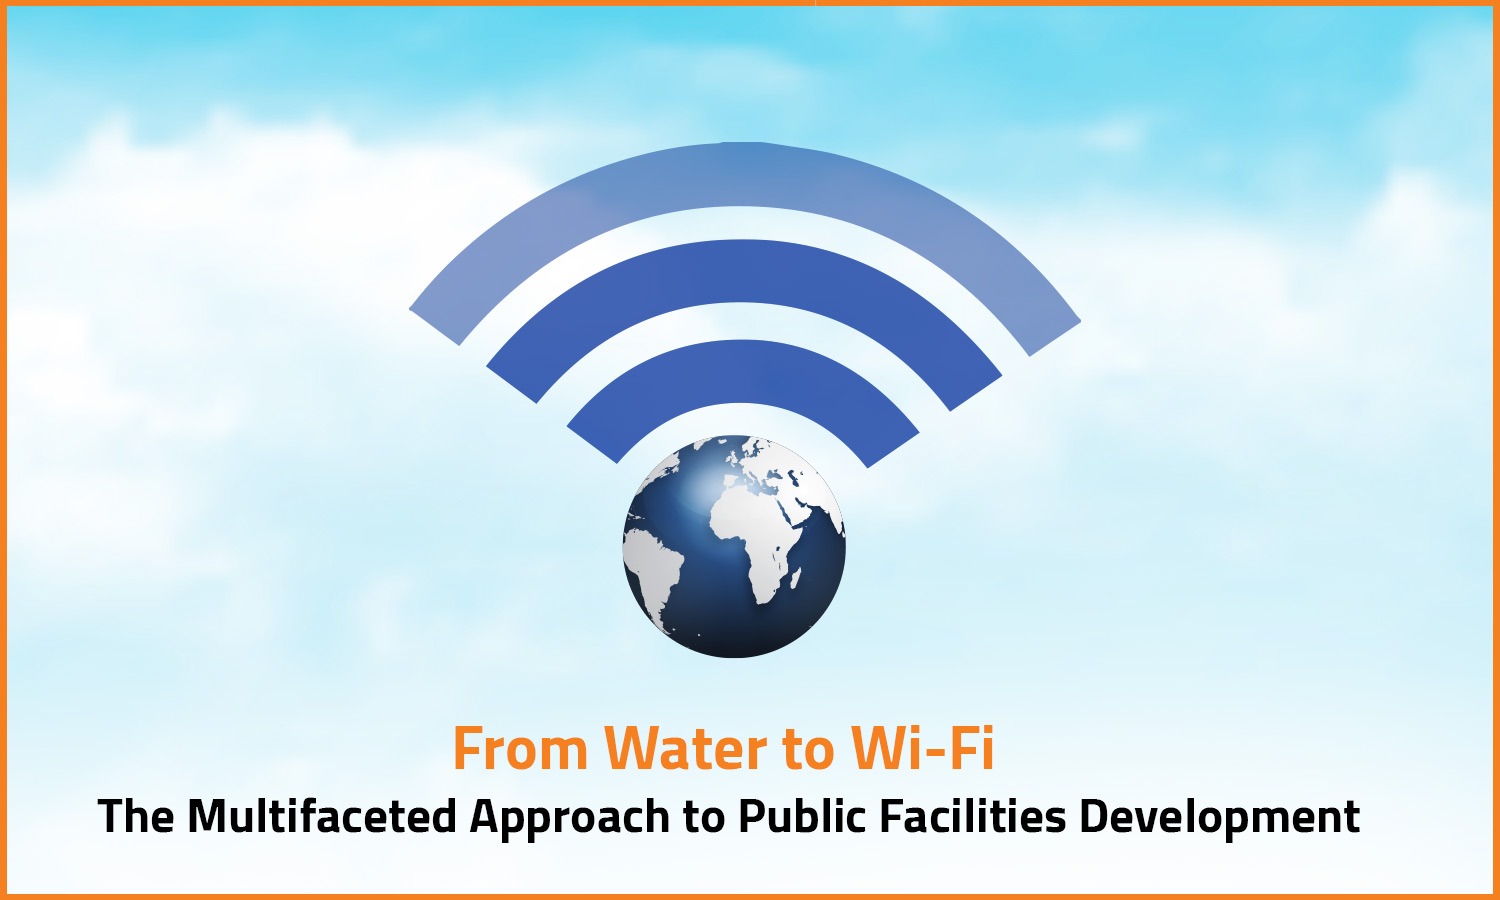 From Water to Wi-Fi: The Multifaceted Approach to Public Facilities Development

